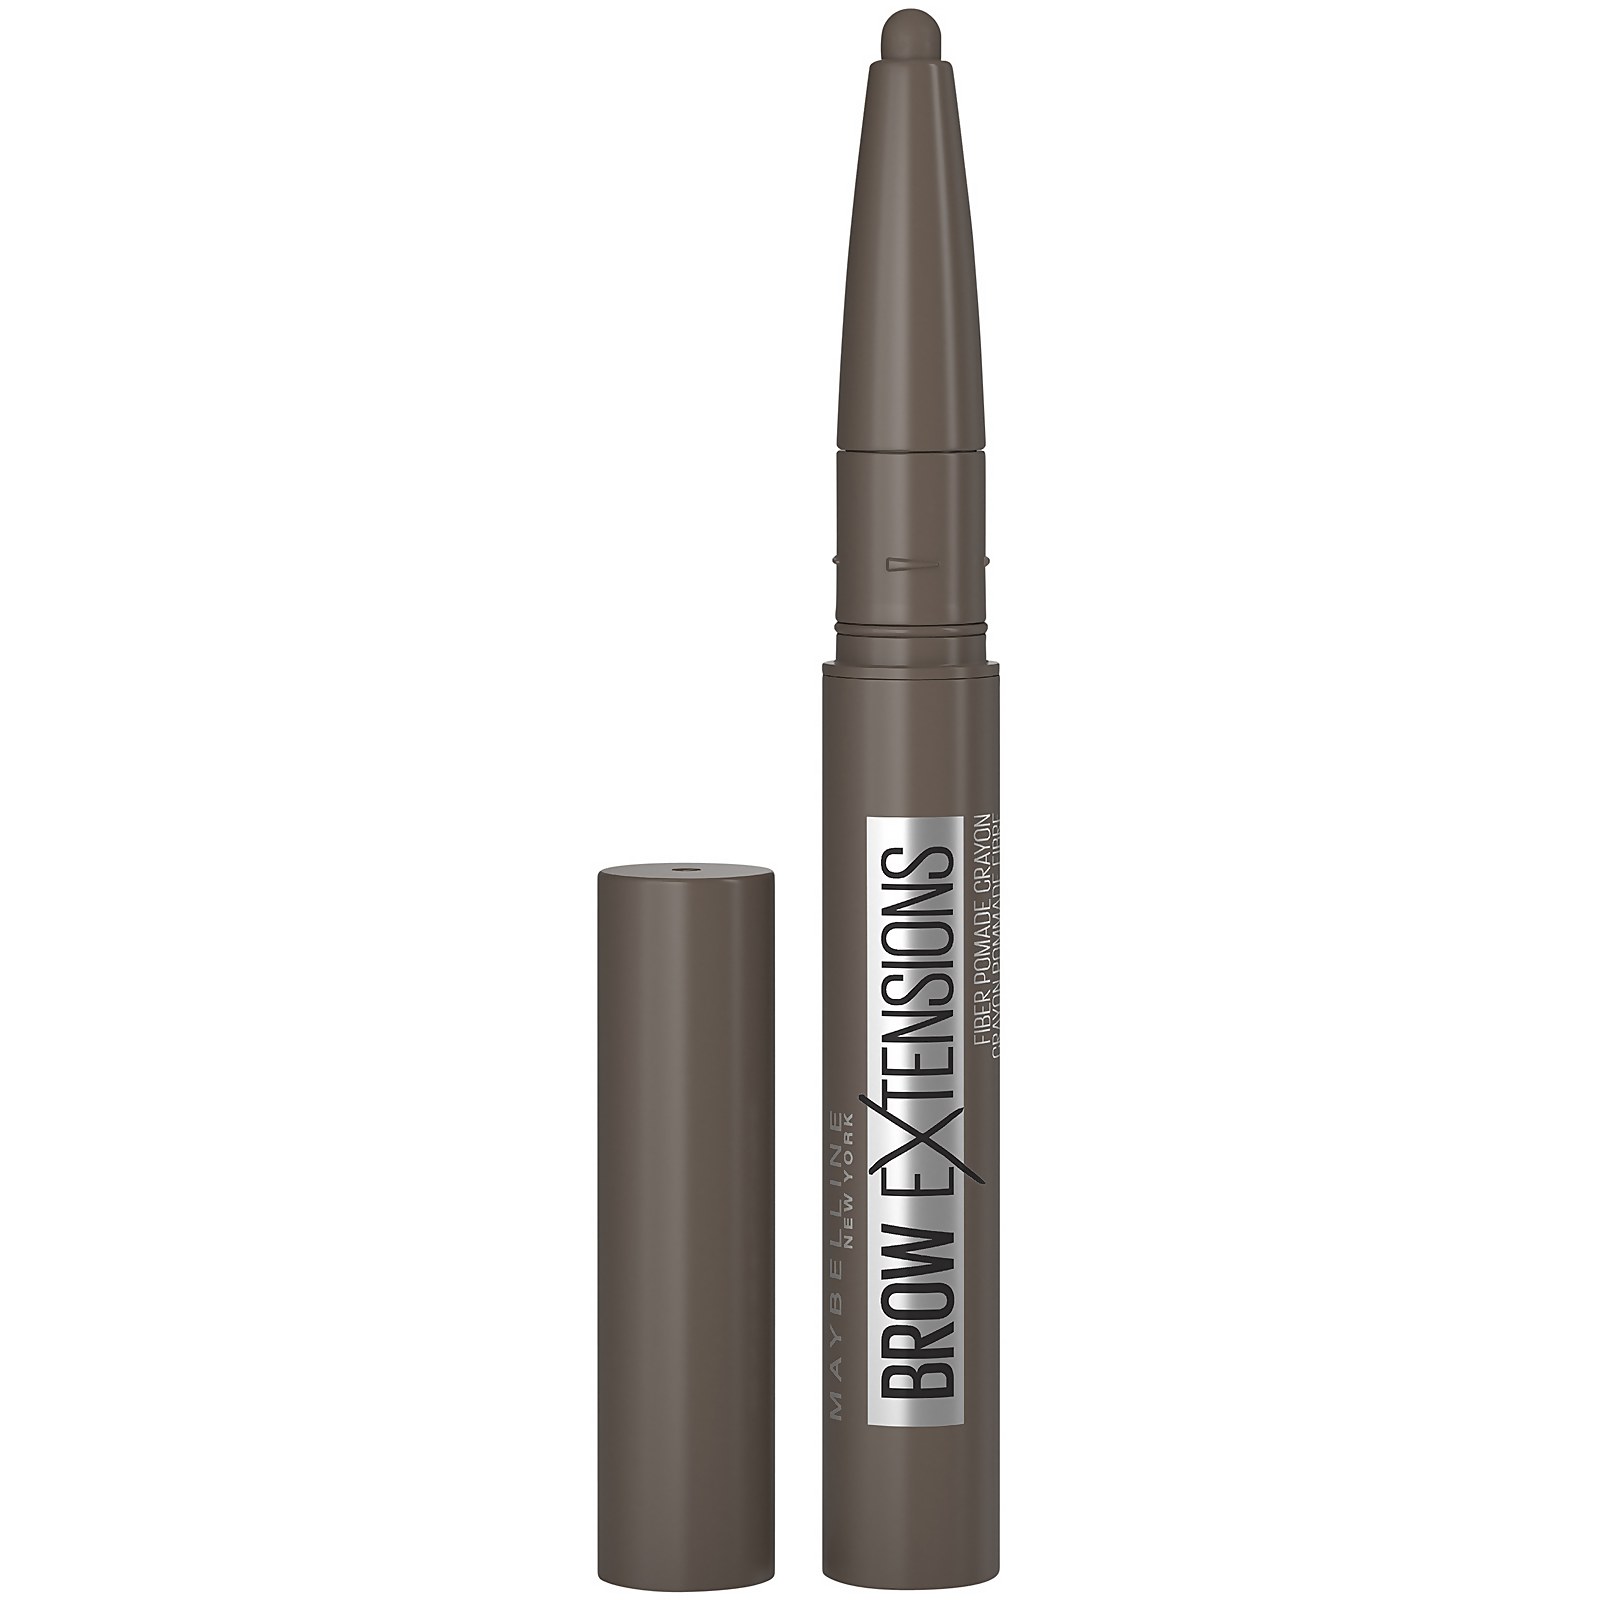 Image of Maybelline Brow Extensions Eyebrow Pomade Crayon 21ml (Various Shades) - Deep Brown